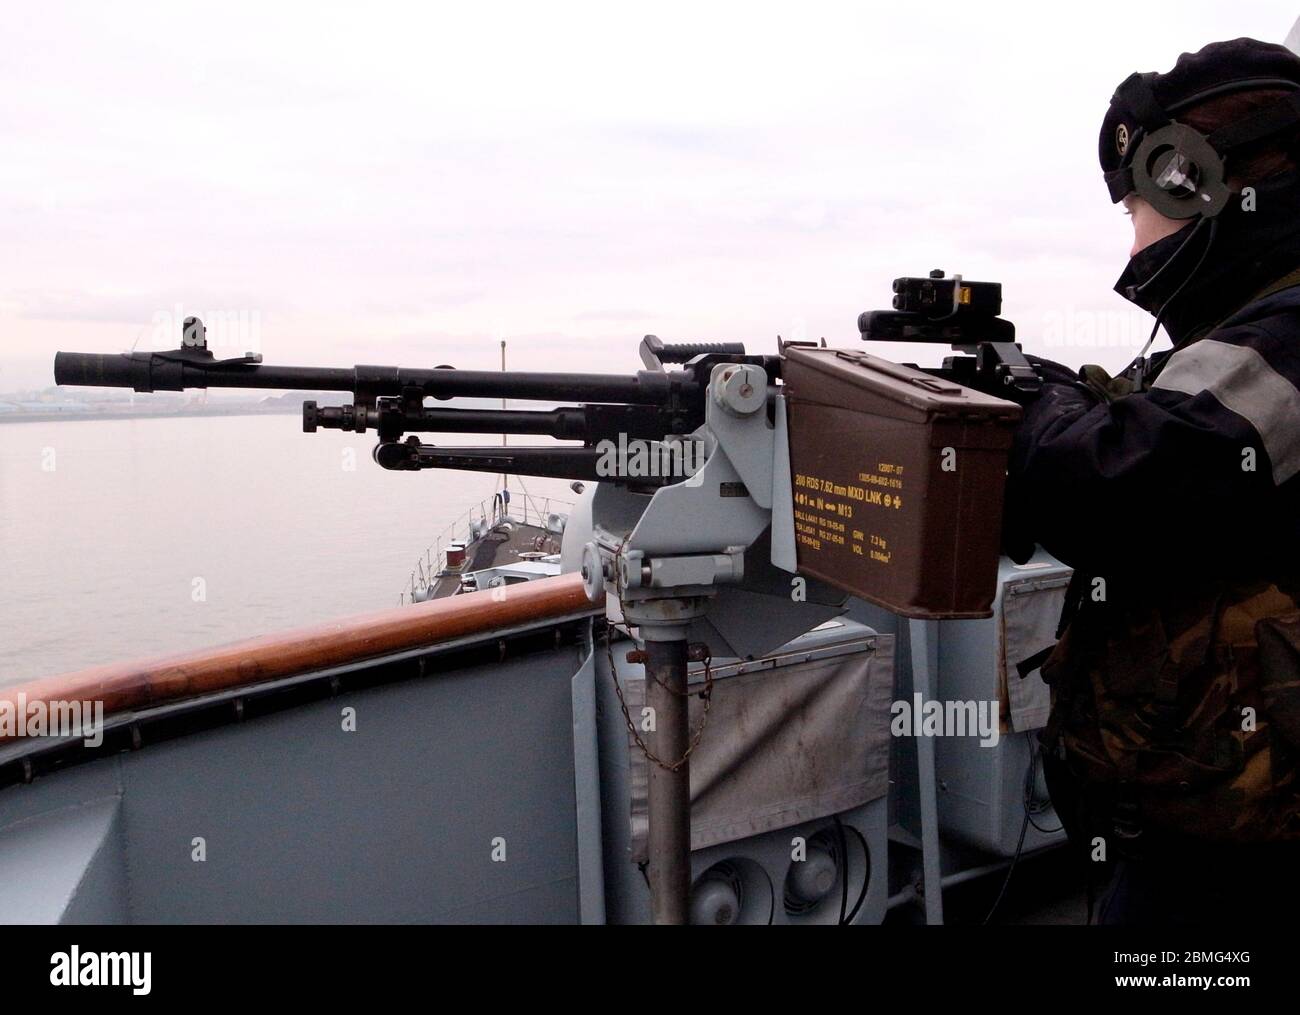 AJAXNETPHOTO. 29 FEB, 2012. LIVERPOOL, ENGLAND. - HMS LIVERPOOL. GLASGOW TO LIVERPOOL PASSAGE - SAILOR MANS ONE OF THE WARSHIP'S GENERAL PURPOSE 7.62MM MACHINE GUNS MOUNTED ON THE BRIDGE WING OF TYPE 45 DESTROYER AS IT ENTERS MERSEY RIVER ON ROUTE TO CRUISE TERMINAL. PHOTO: JONATHAN EASTLAND/AJAX REF: GR122902 3338 Stock Photo